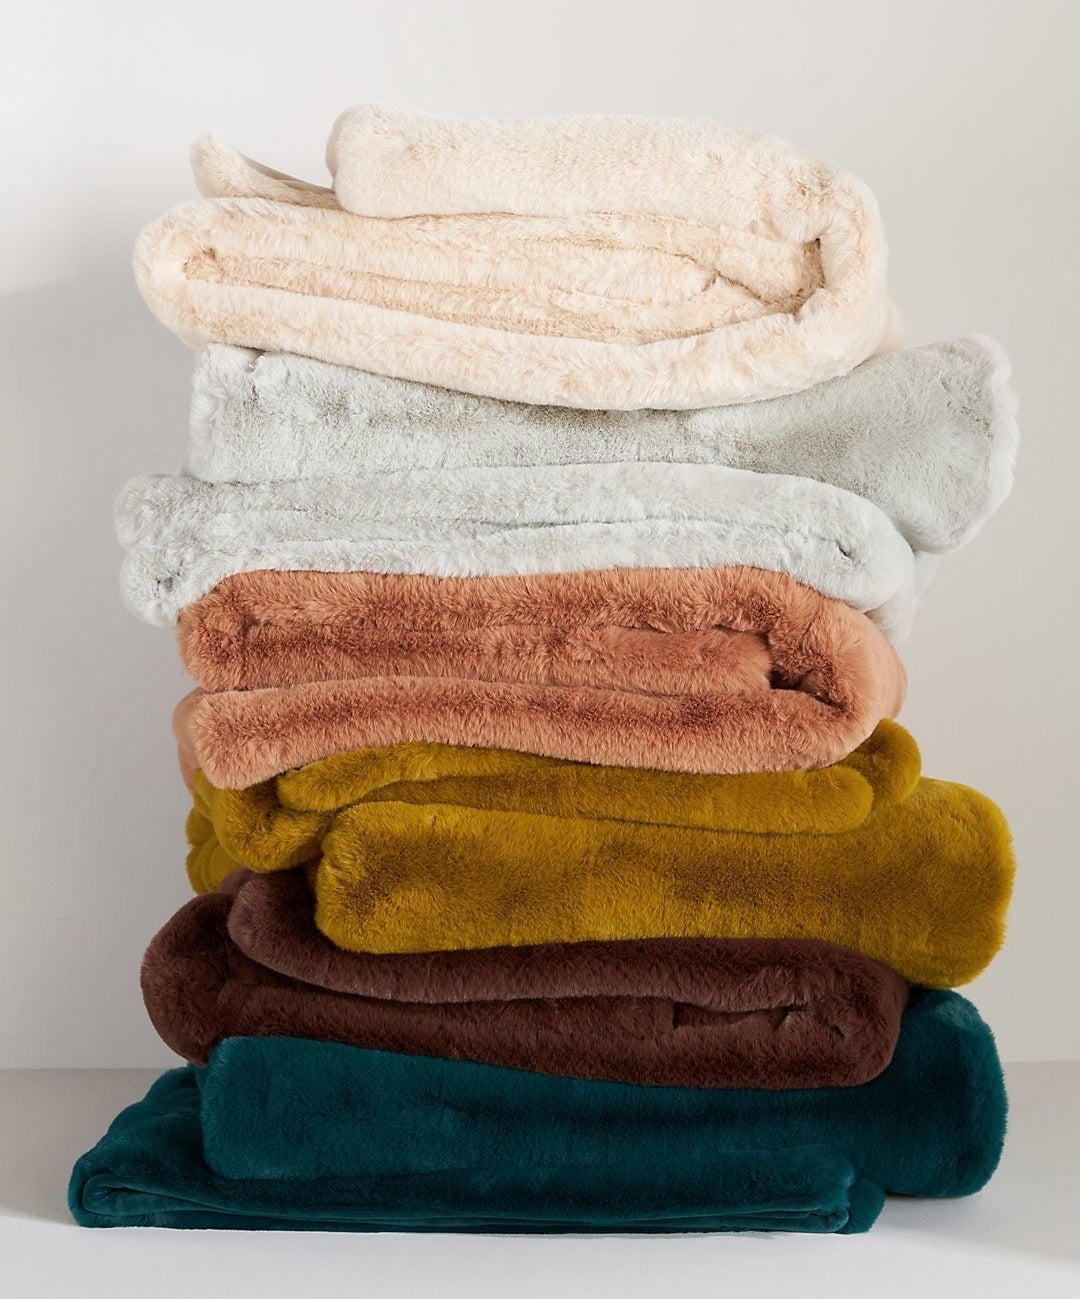 stack of folded faux fur blankets in jewel tones and neutrals